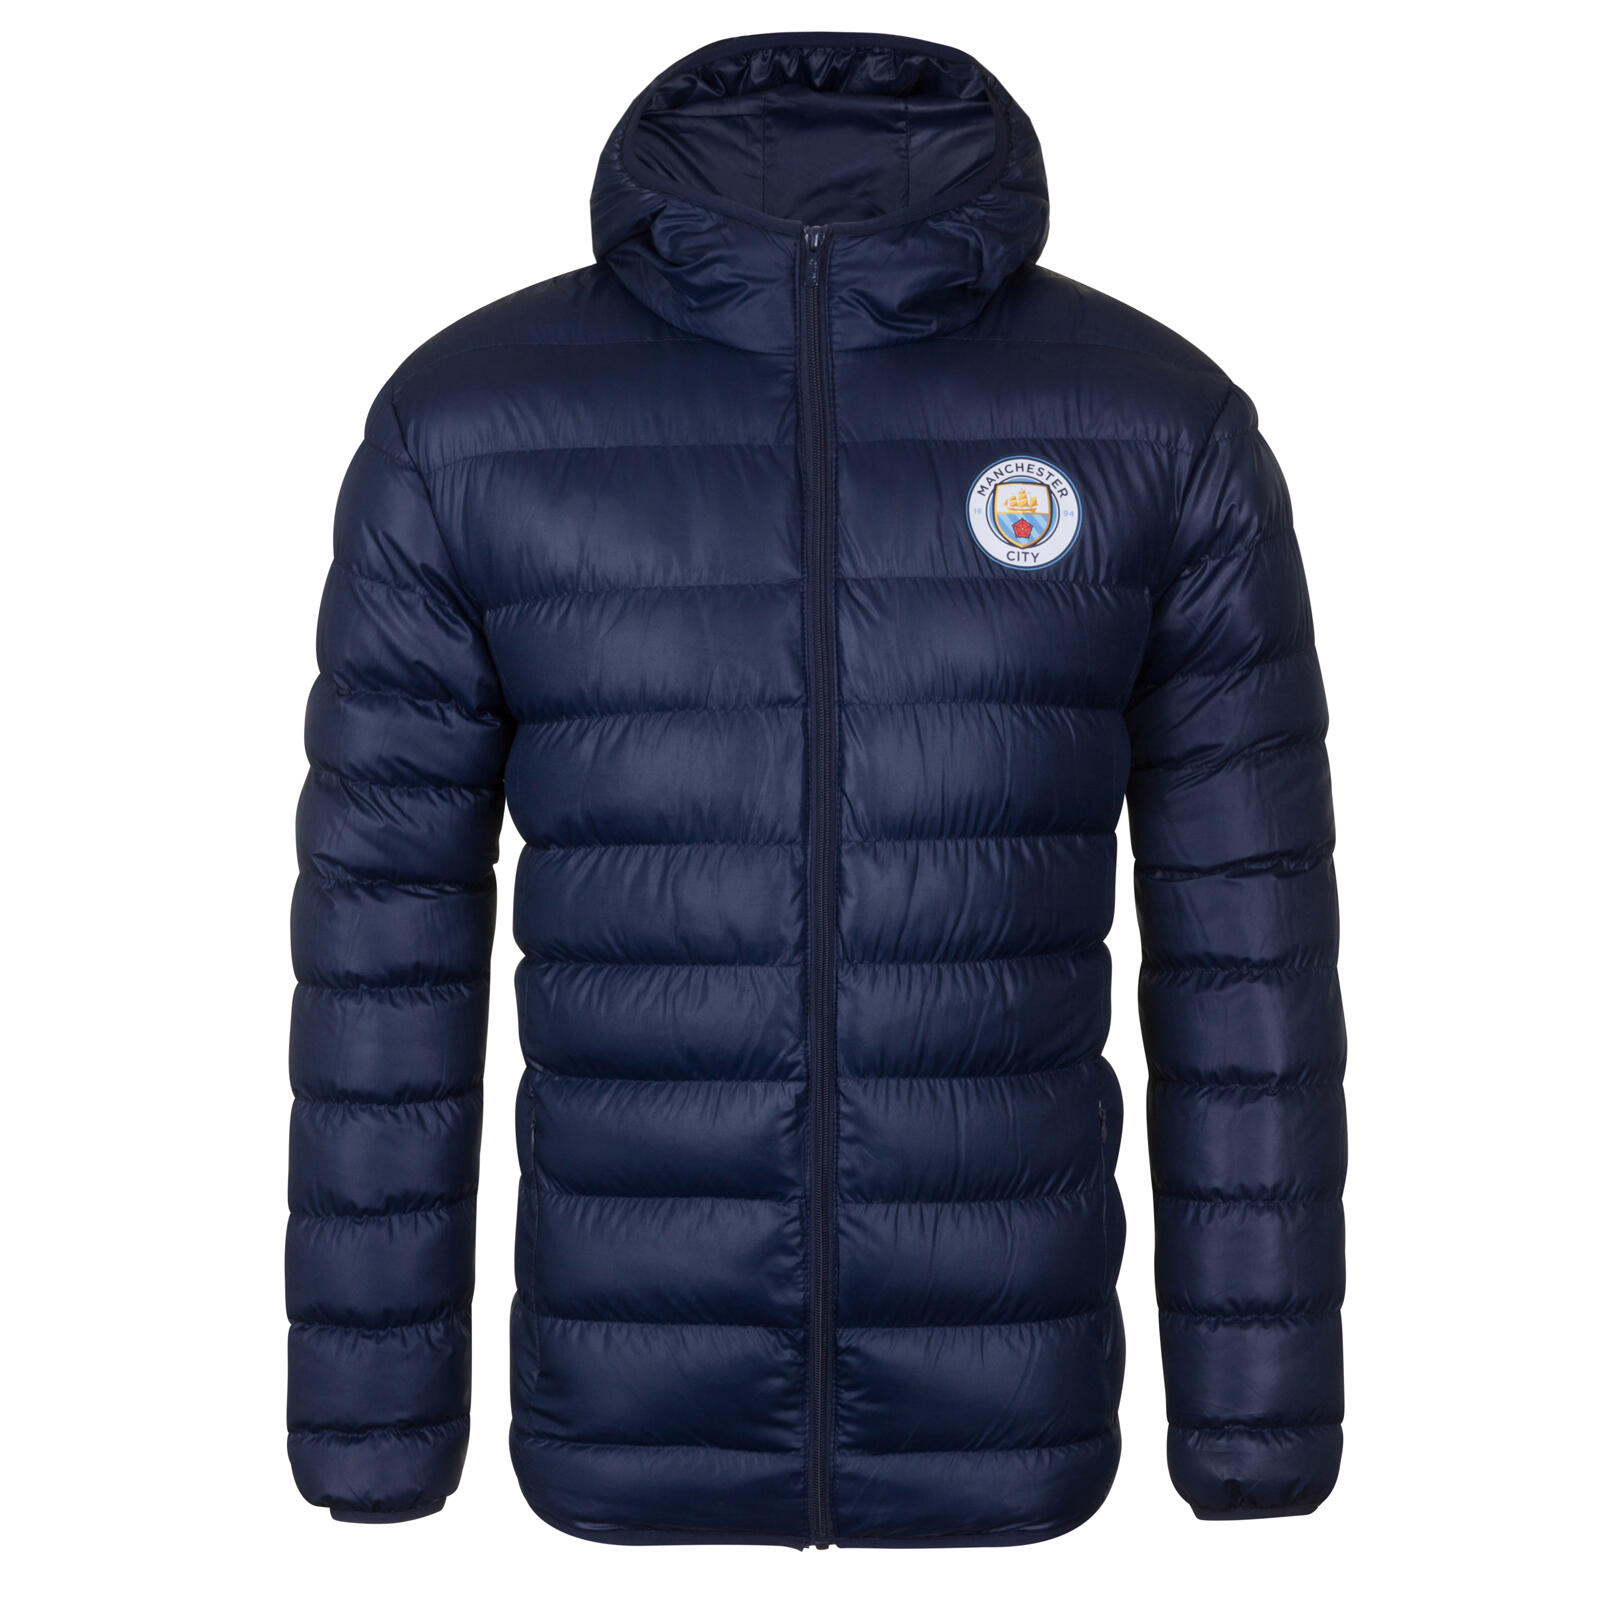 Manchester City Mens Jacket Hooded Winter Quilted OFFICIAL Football Gift 1/6